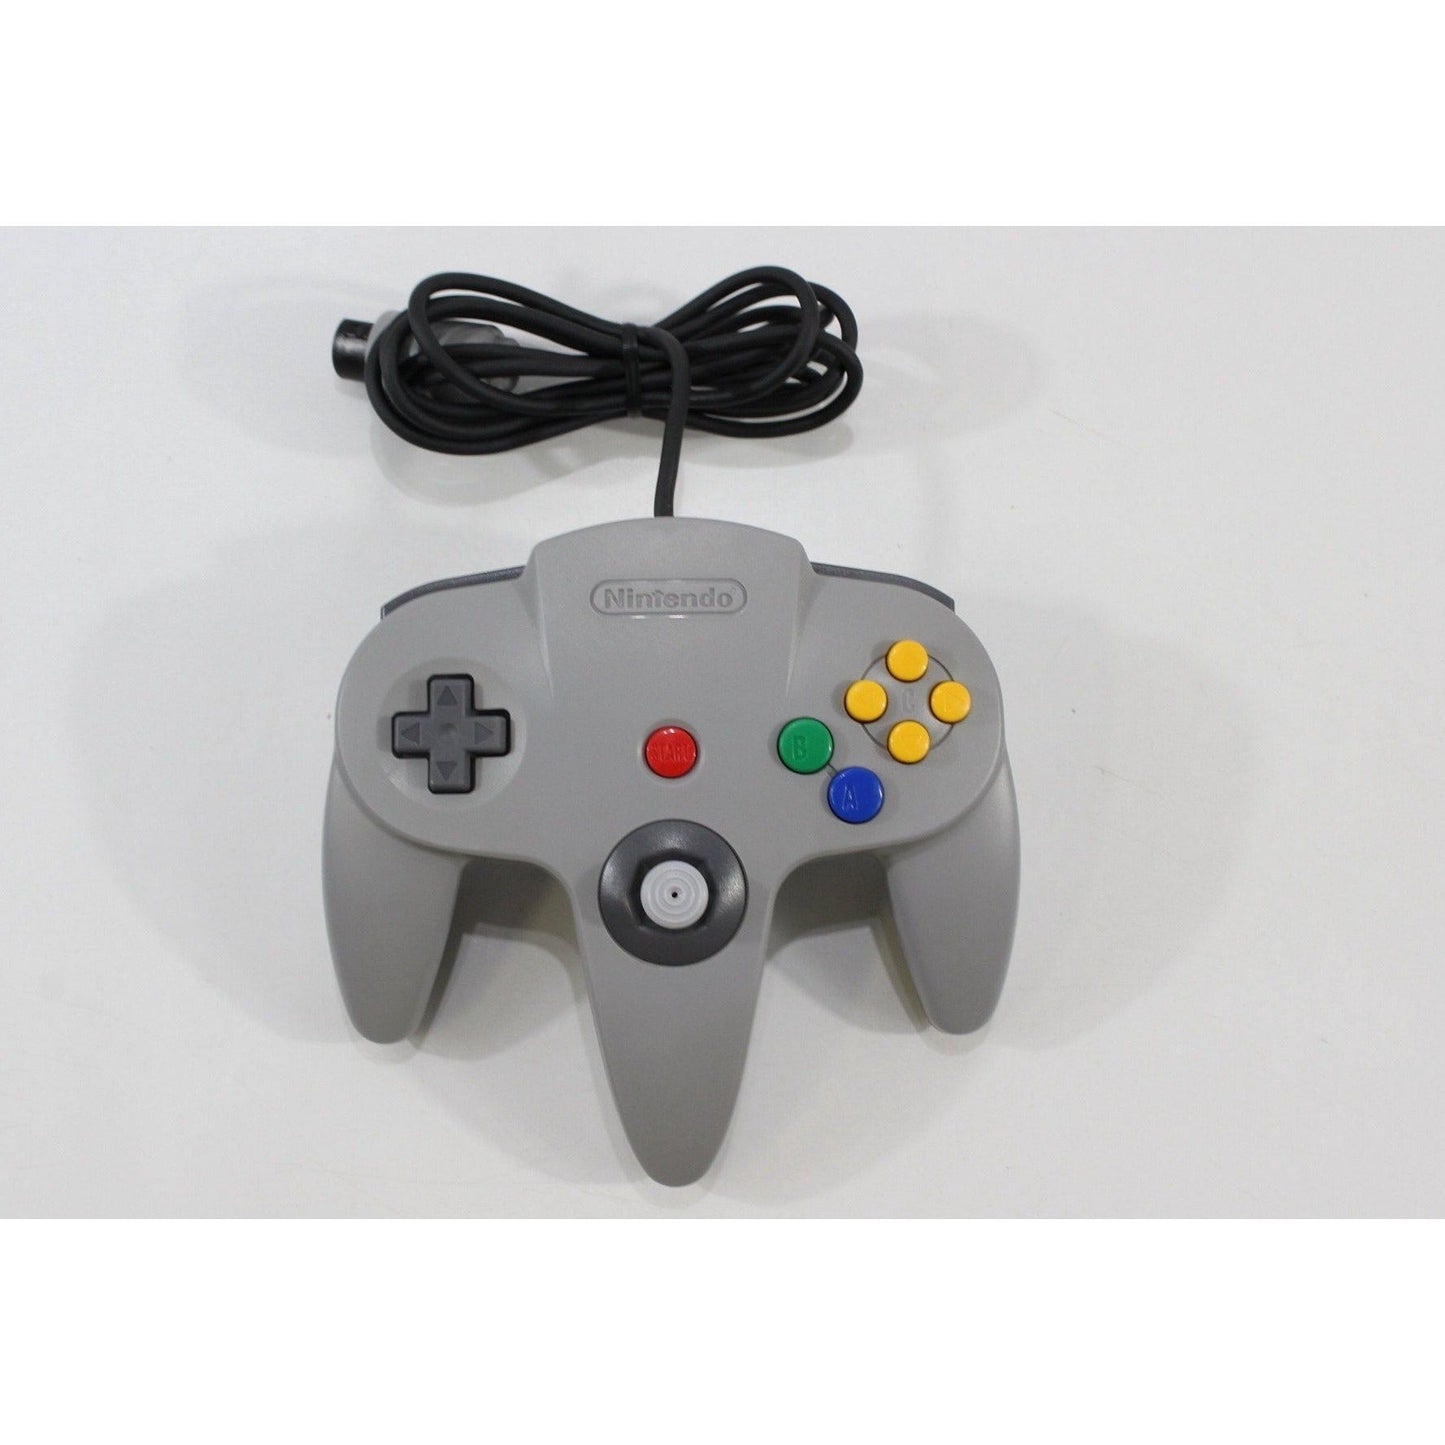 Authentic Nintendo 64 N64 Controller- Gray from 2P Gaming